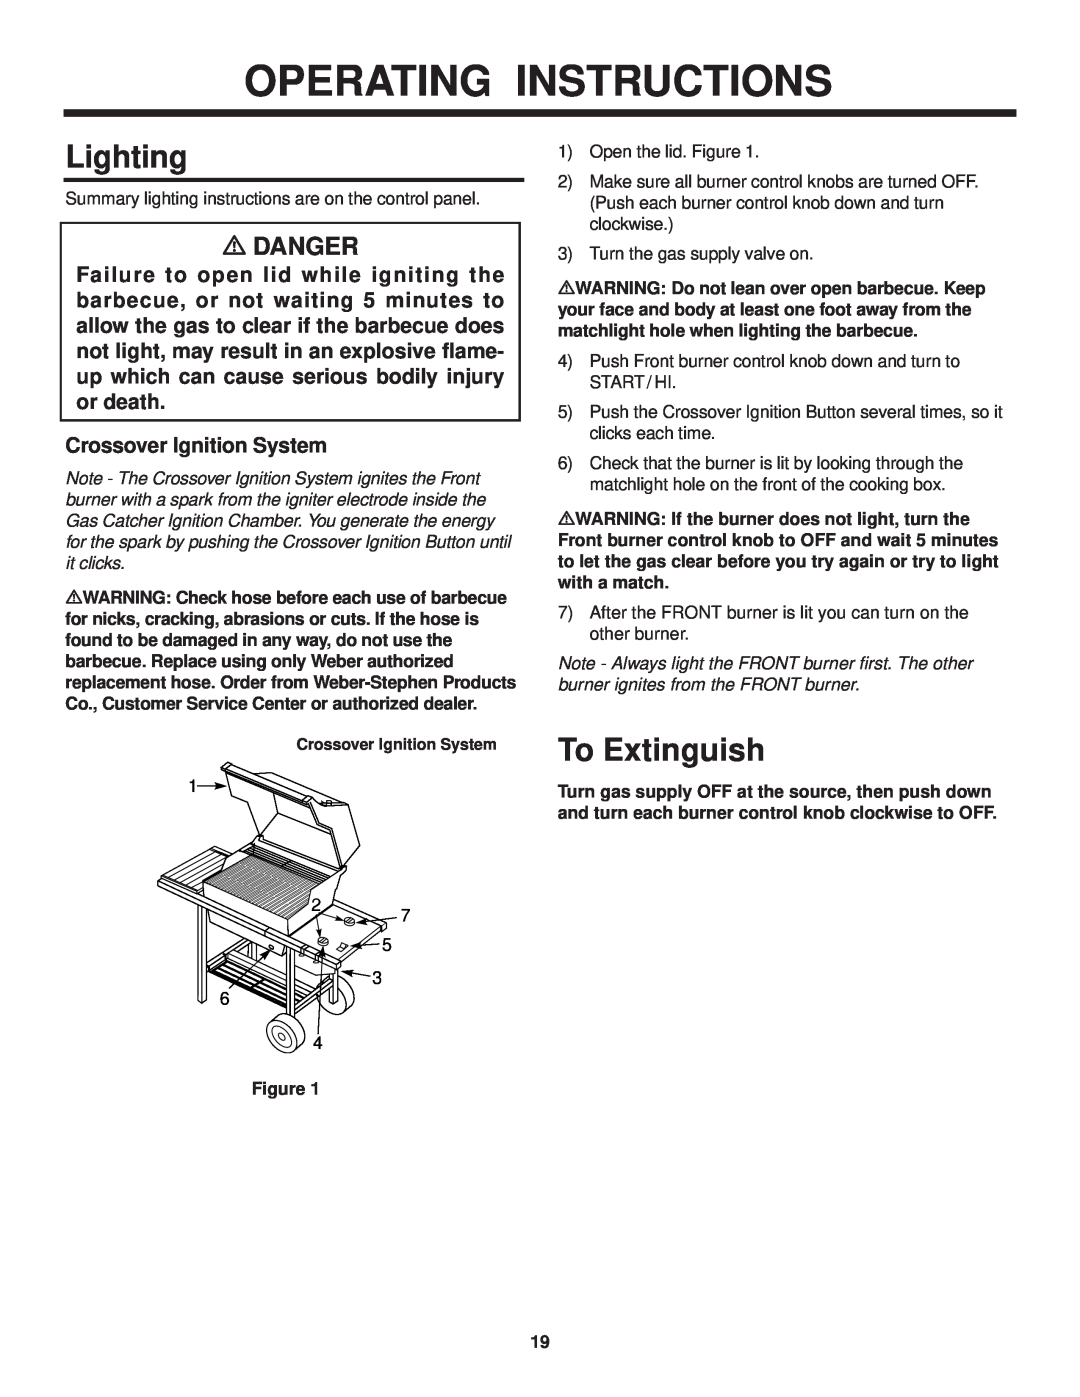 Weber 500 LX owner manual Operating Instructions, Lighting, To Extinguish, m DANGER, Crossover Ignition System 